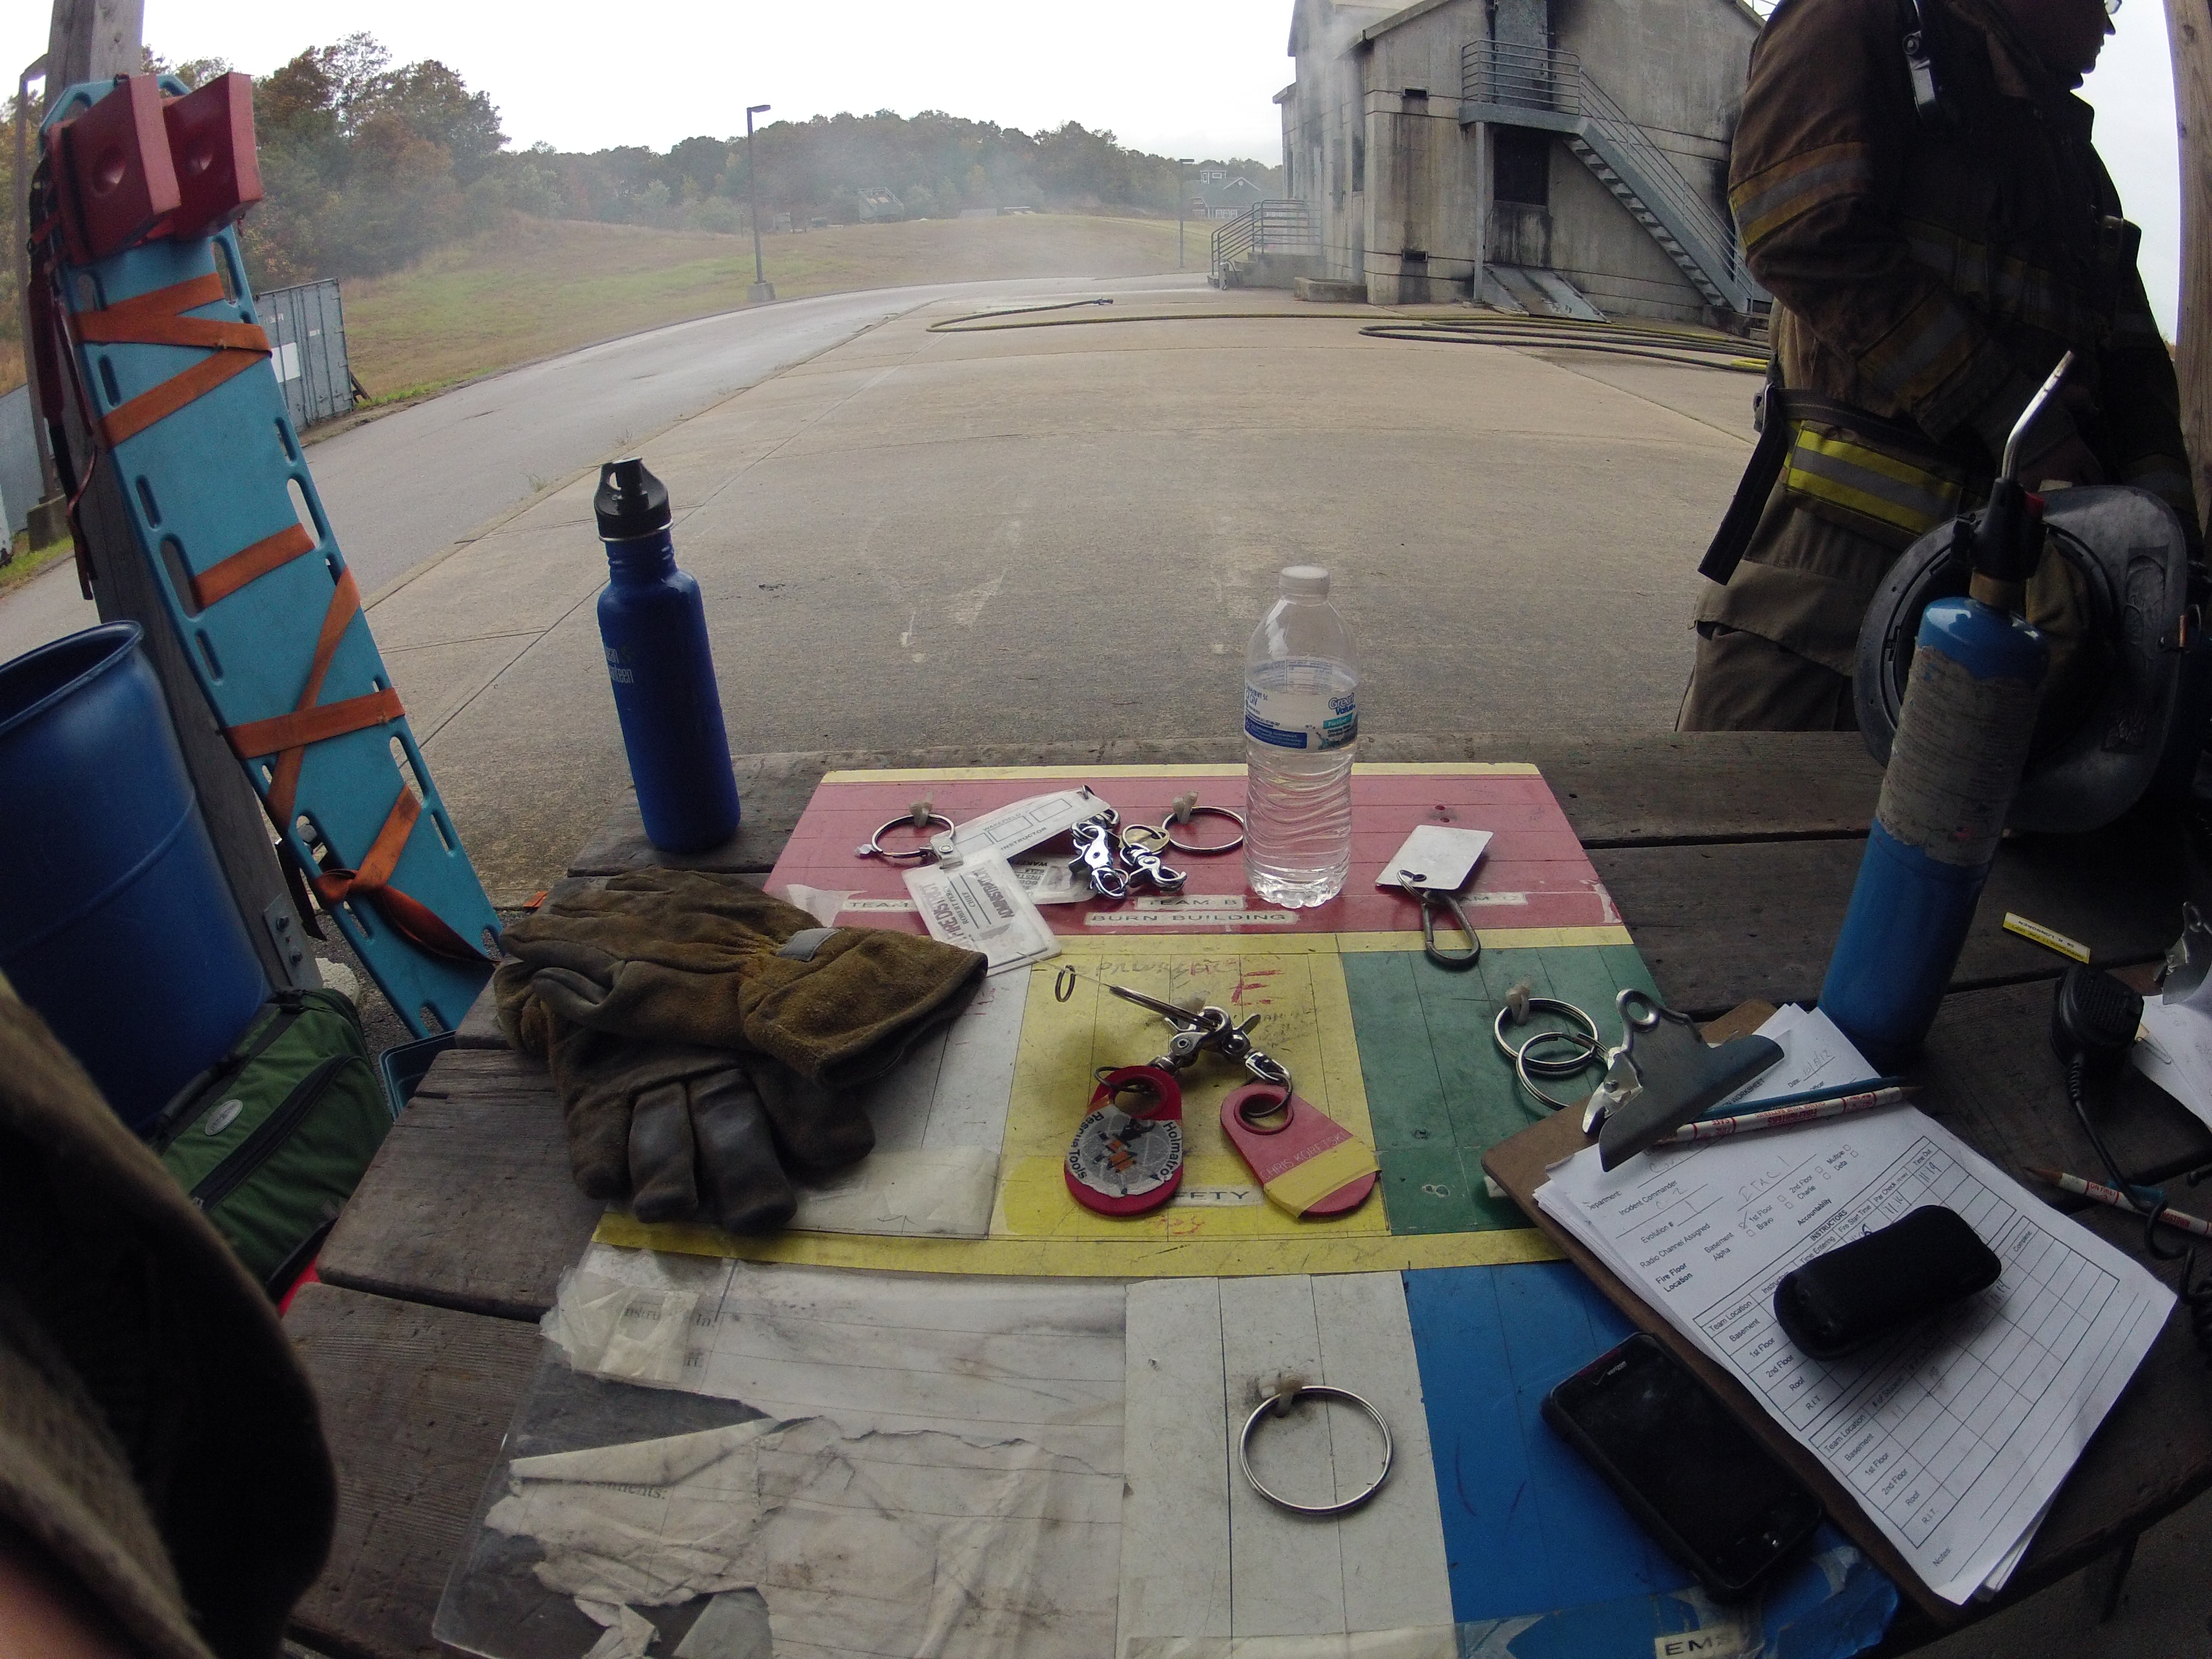 a view of items located on a table where incident managers regularly established a command post during evolutions at the training center. Items include an accountability board, firefighter accountability tags, a clipboard containing check lists, guidelines, and tracking charts, a pair of firefighting gloves, two water bottles, a torch, a cell phone, pencils, and a radio.